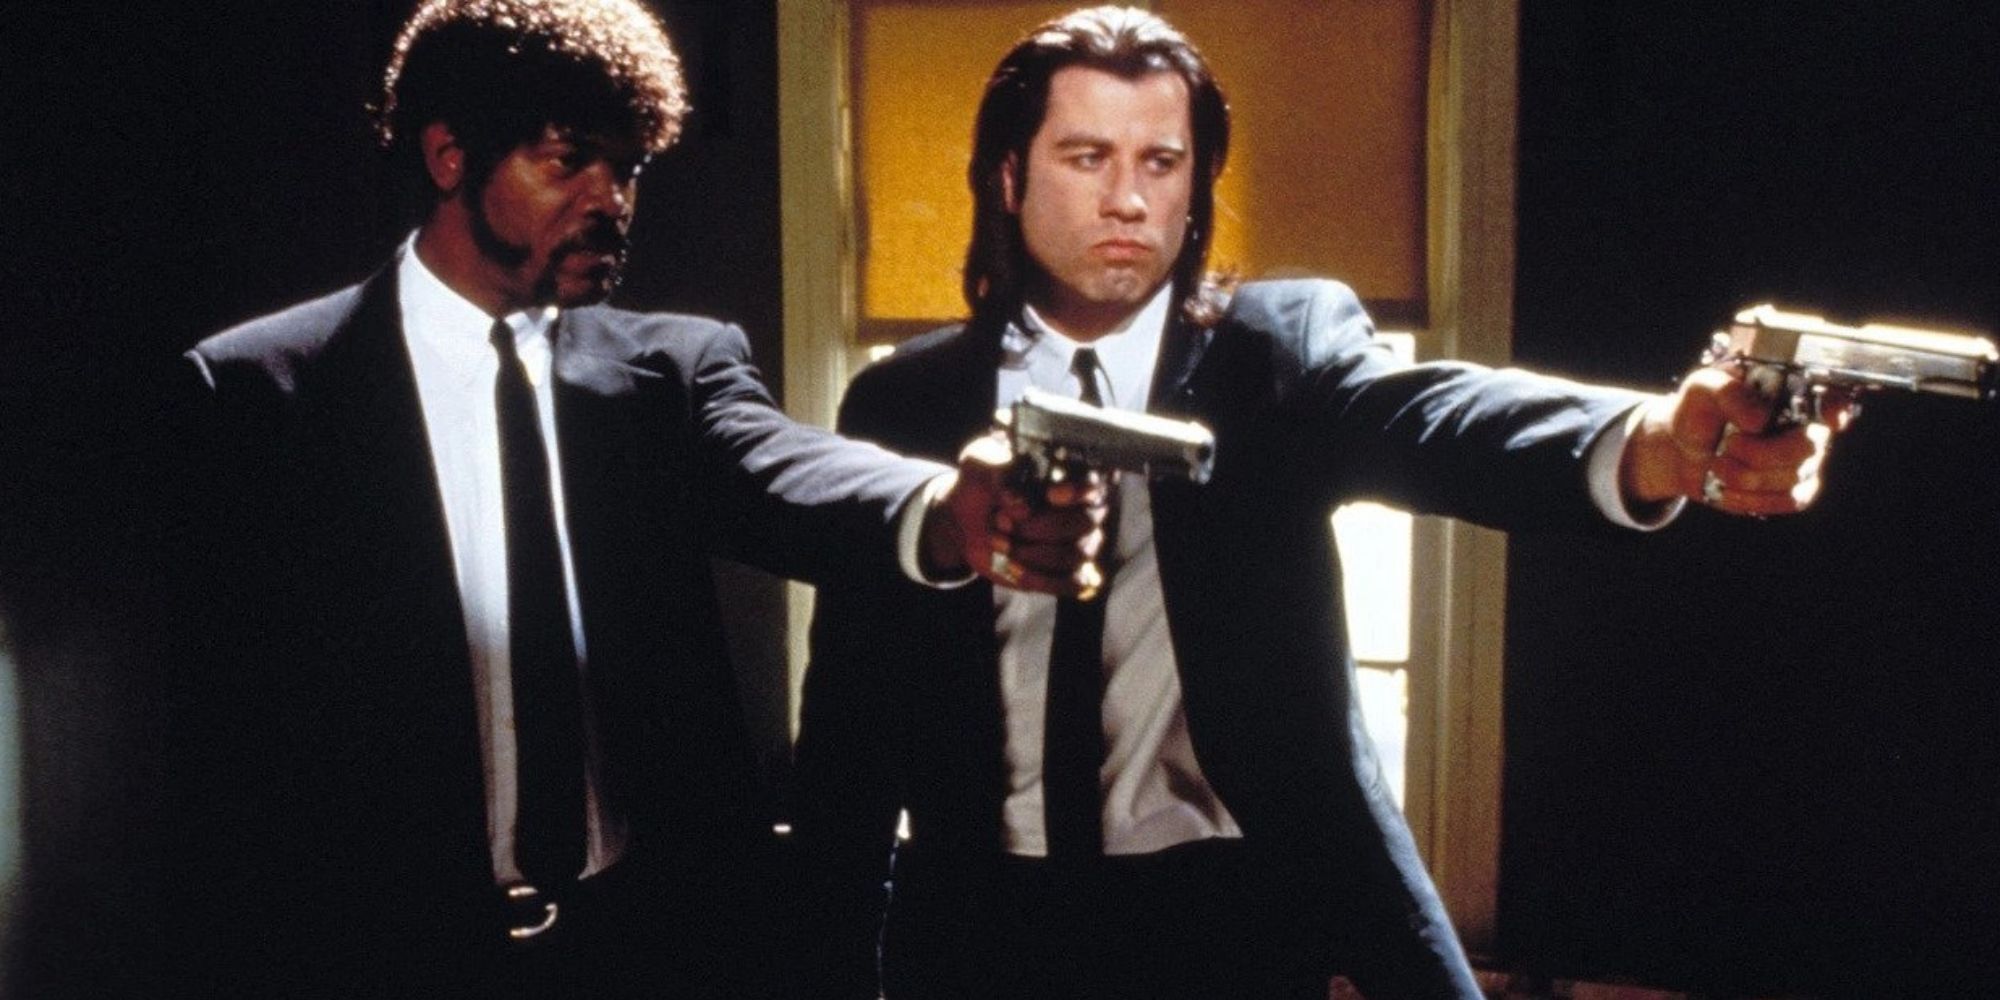 Samuel L. Jackson and John Travolta in suits holding guns in a scene from Pulp Fiction